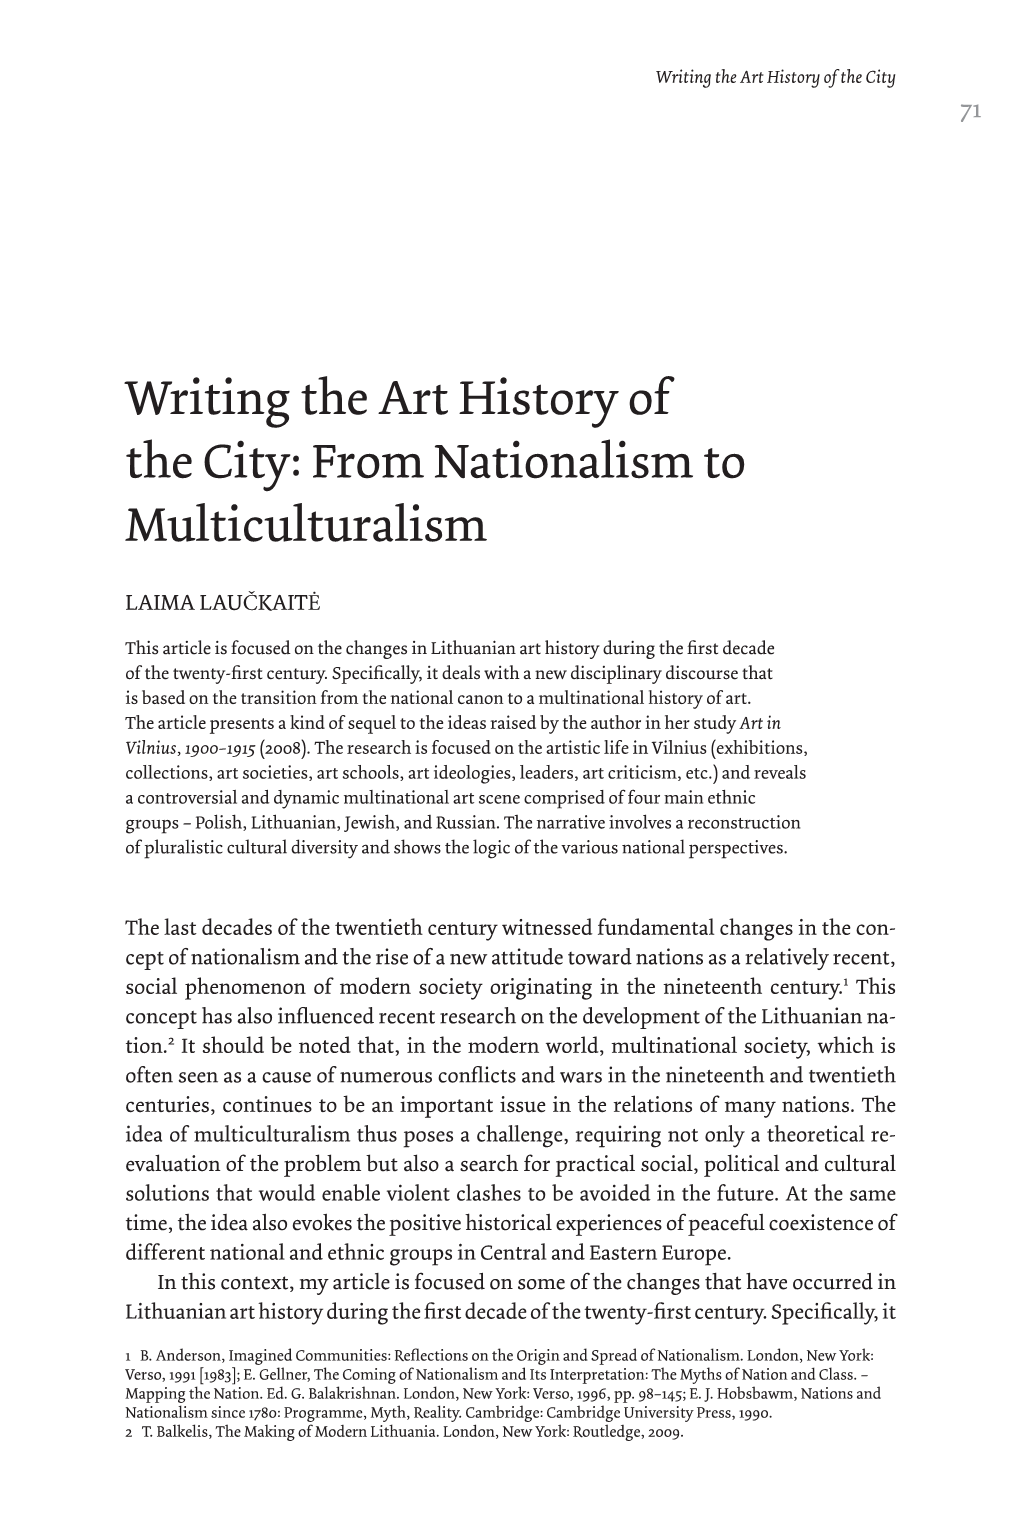 Writing the Art History of the City: from Nationalism to Multiculturalism